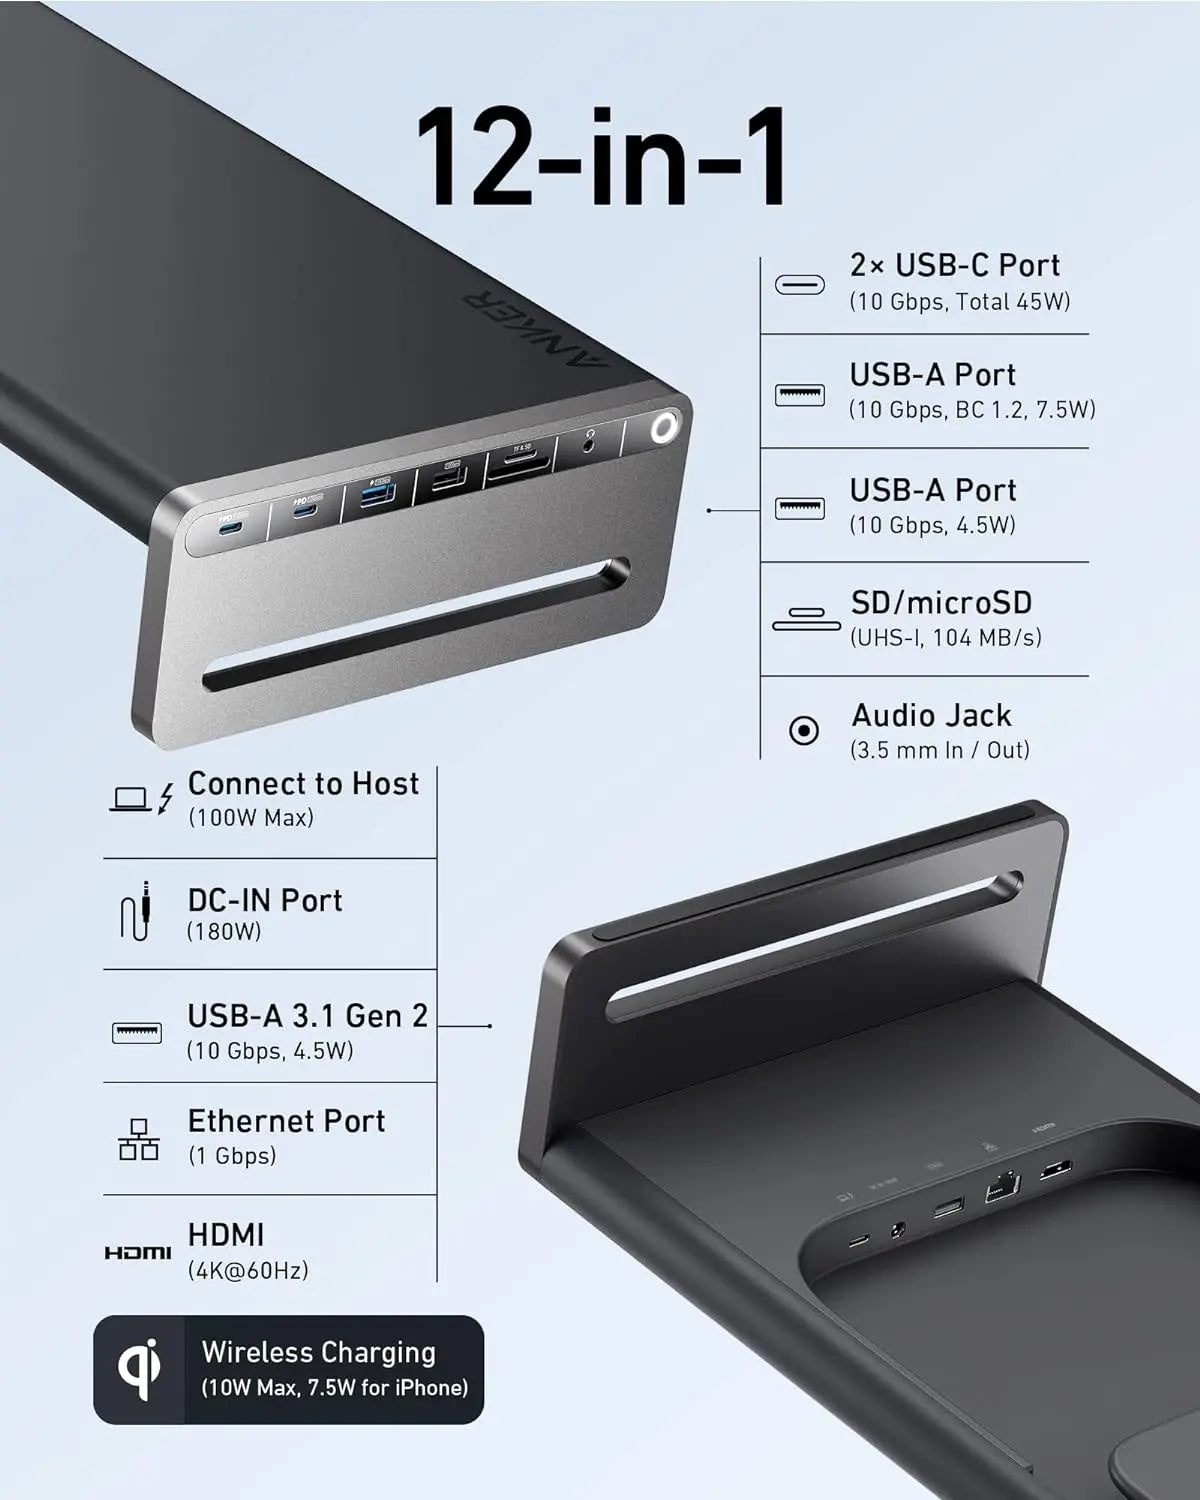 Anker 675 USB-C Docking Station (12-in-1, Monitor Stand) with 10Gbps USB-C Ports A8377 Anker Singapore